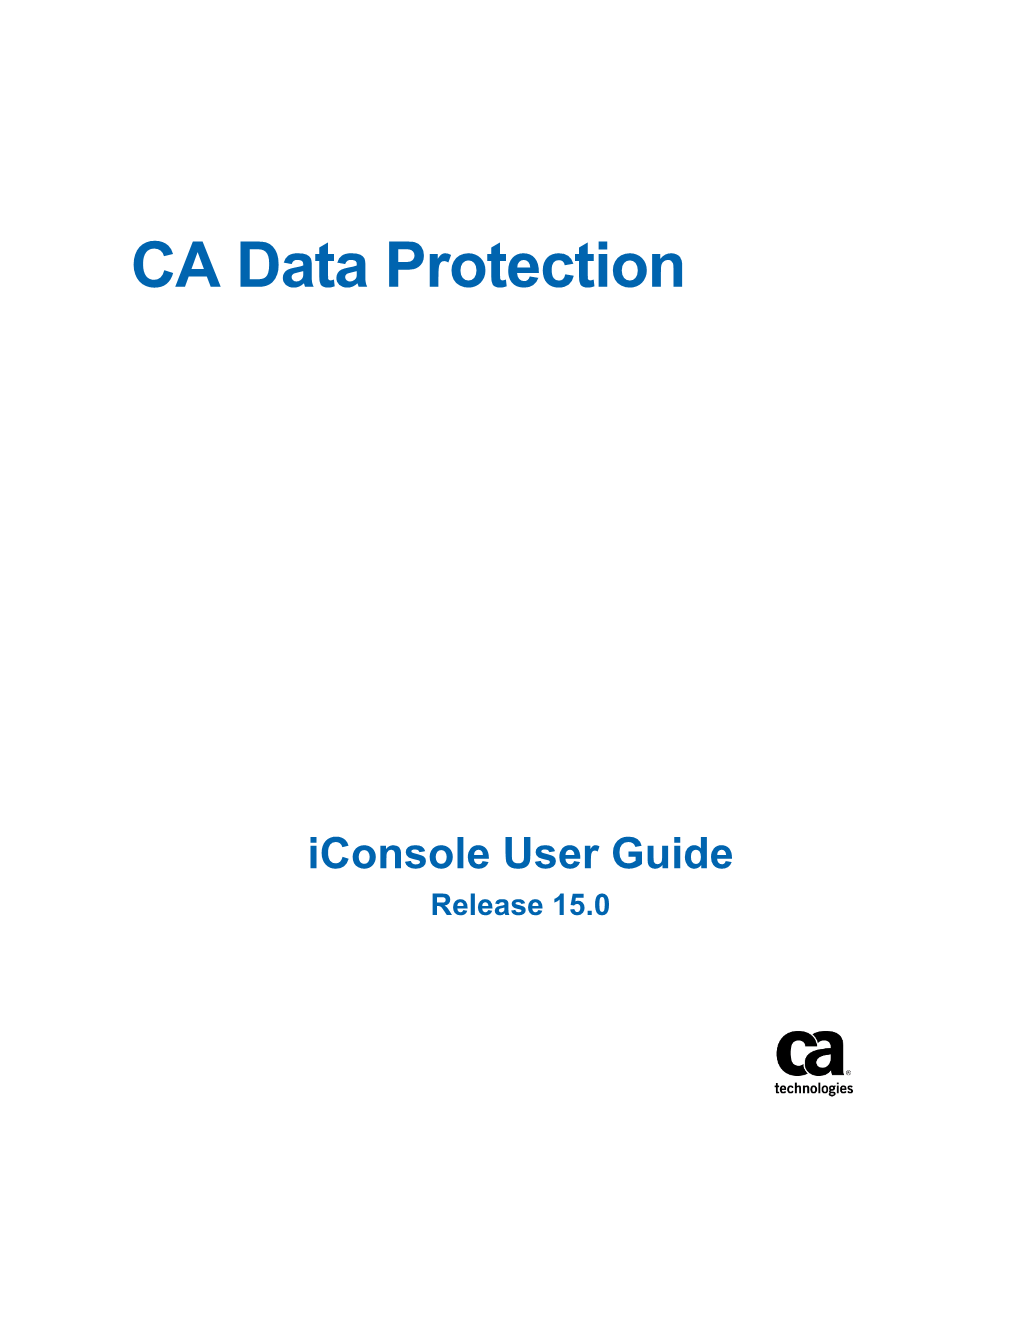 CA Data Protection Iconsole User Guide